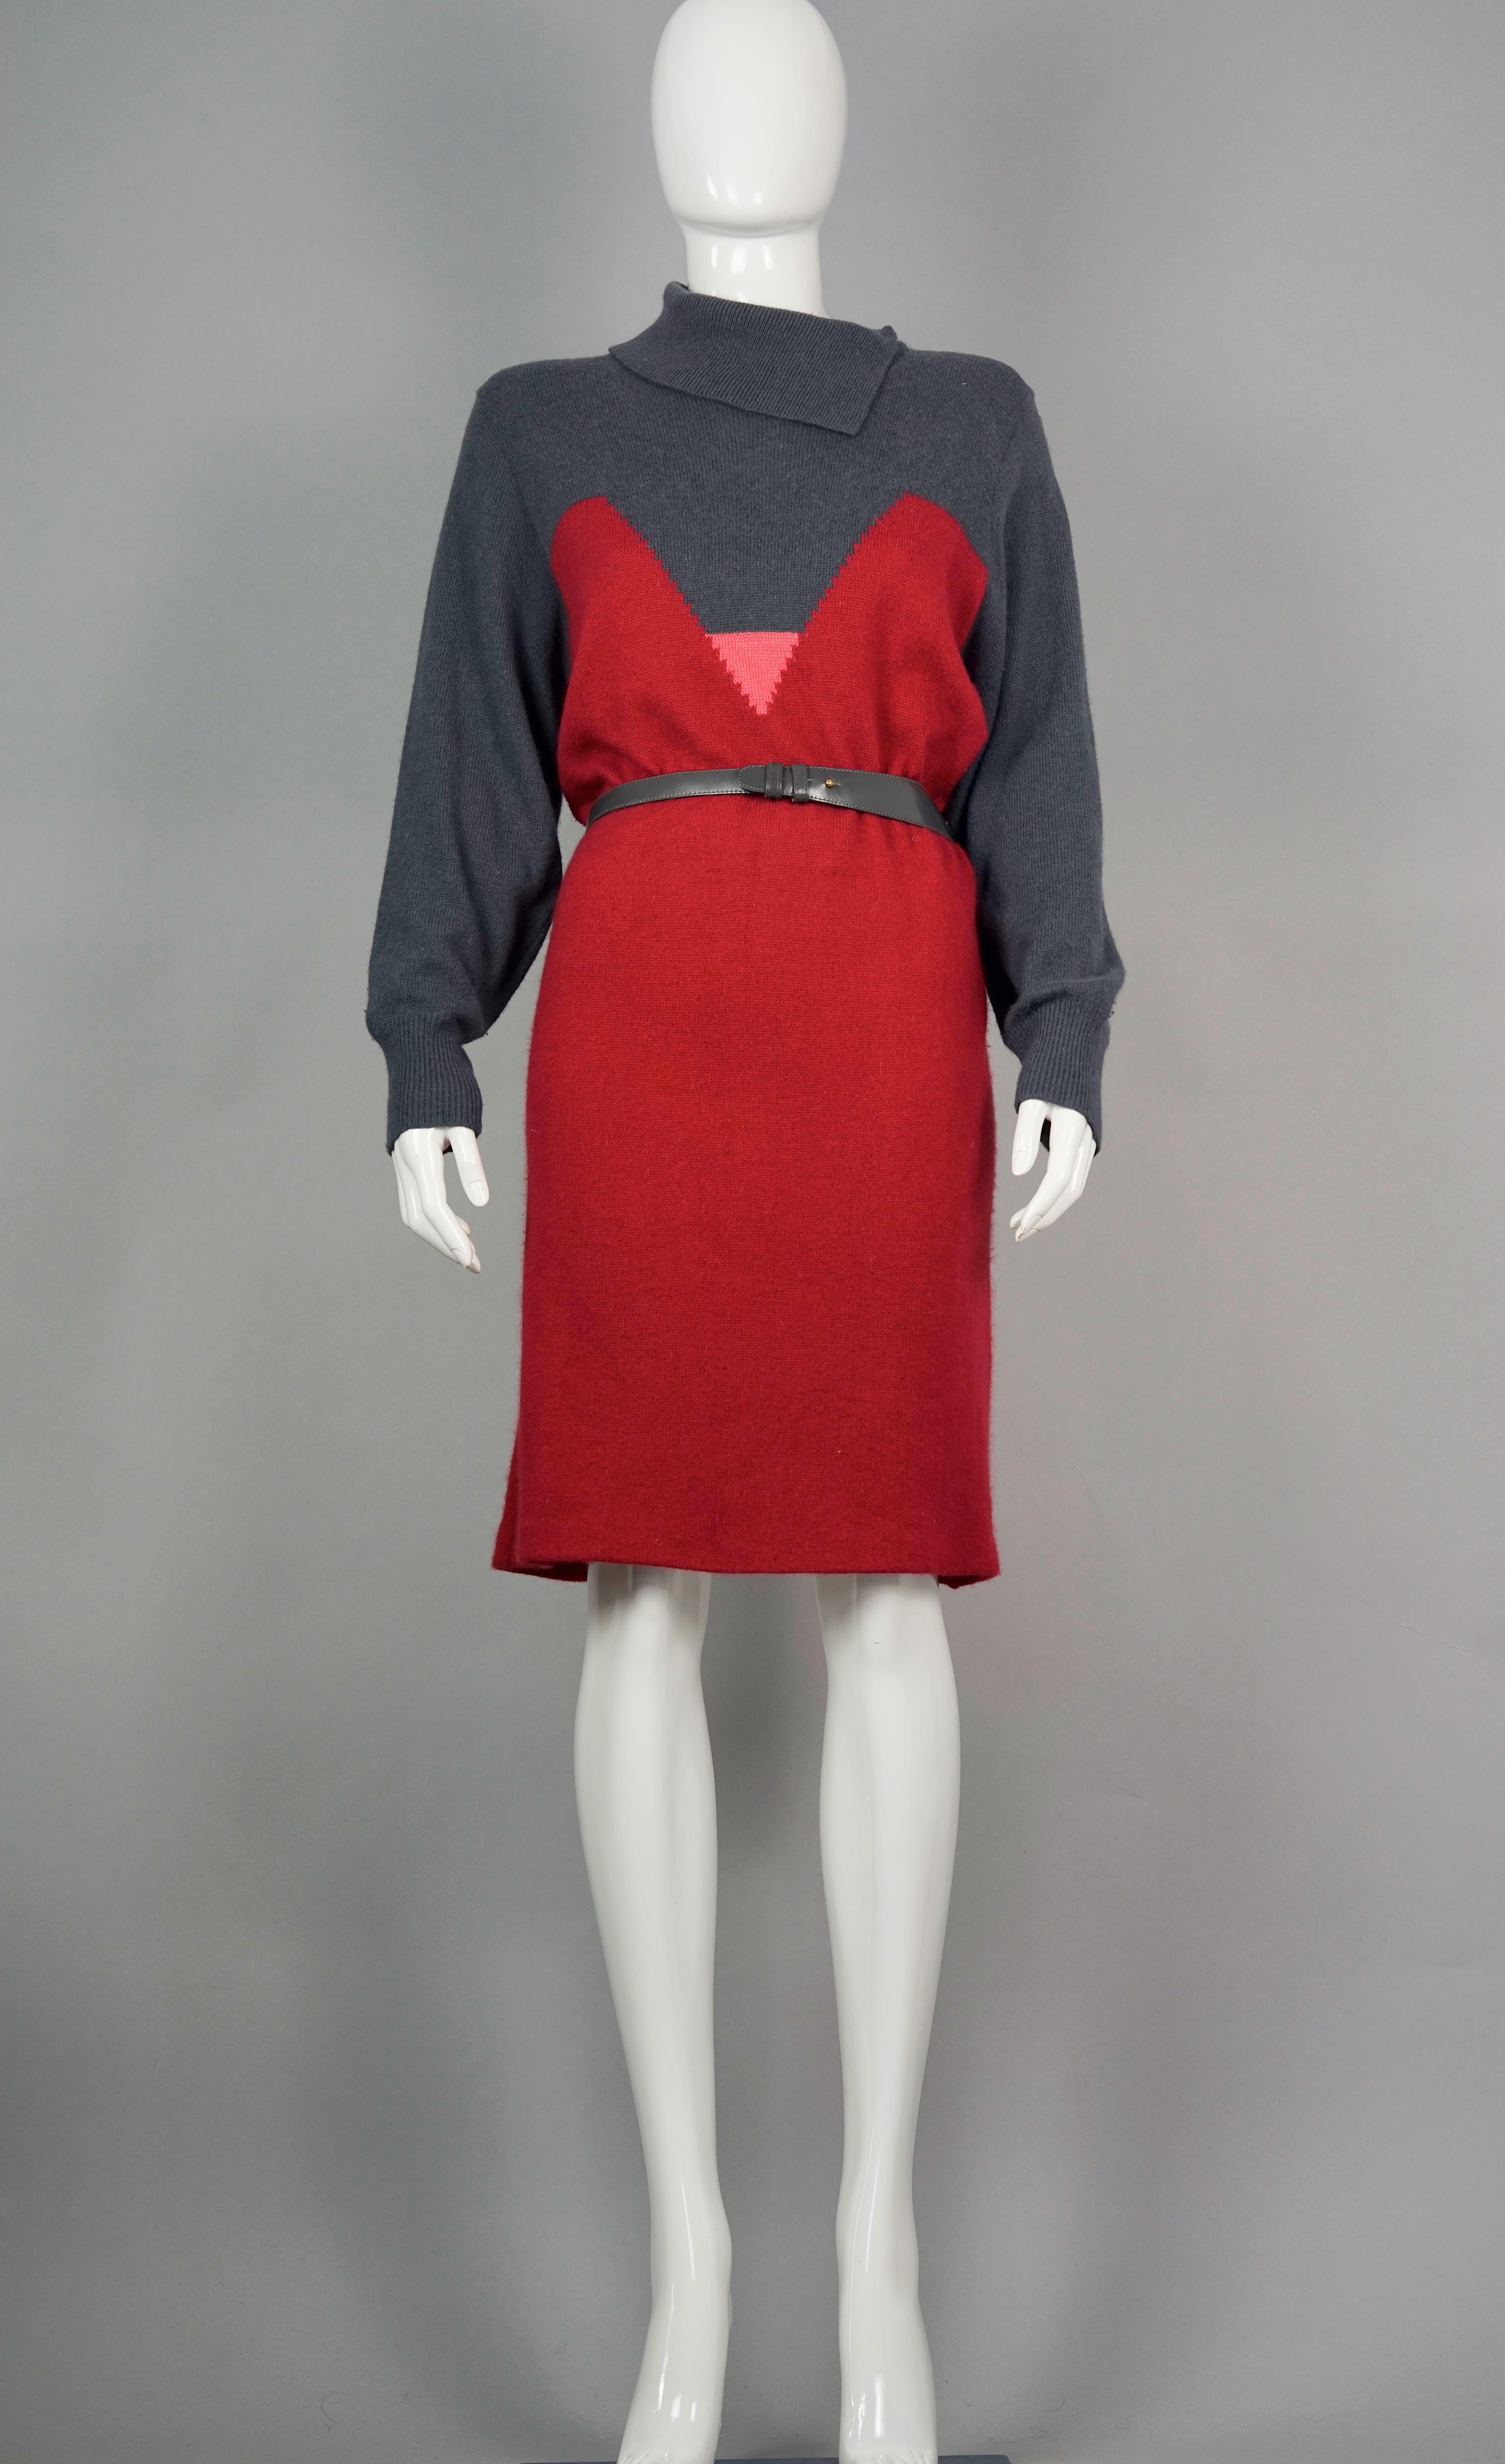 Vintage 1970s PIERRE CARDIN Mod Knit Belted Dress

Measurements taken laid flat, please double bust, waist and hips:
Shoulder: 18.11 inches (46 cm)
Sleeves: 24.40 inches (62 cm)
Bust: 26.77 inches (68 cm)
Waist: 18.50 inches (47 cm)
Hips: 18.89